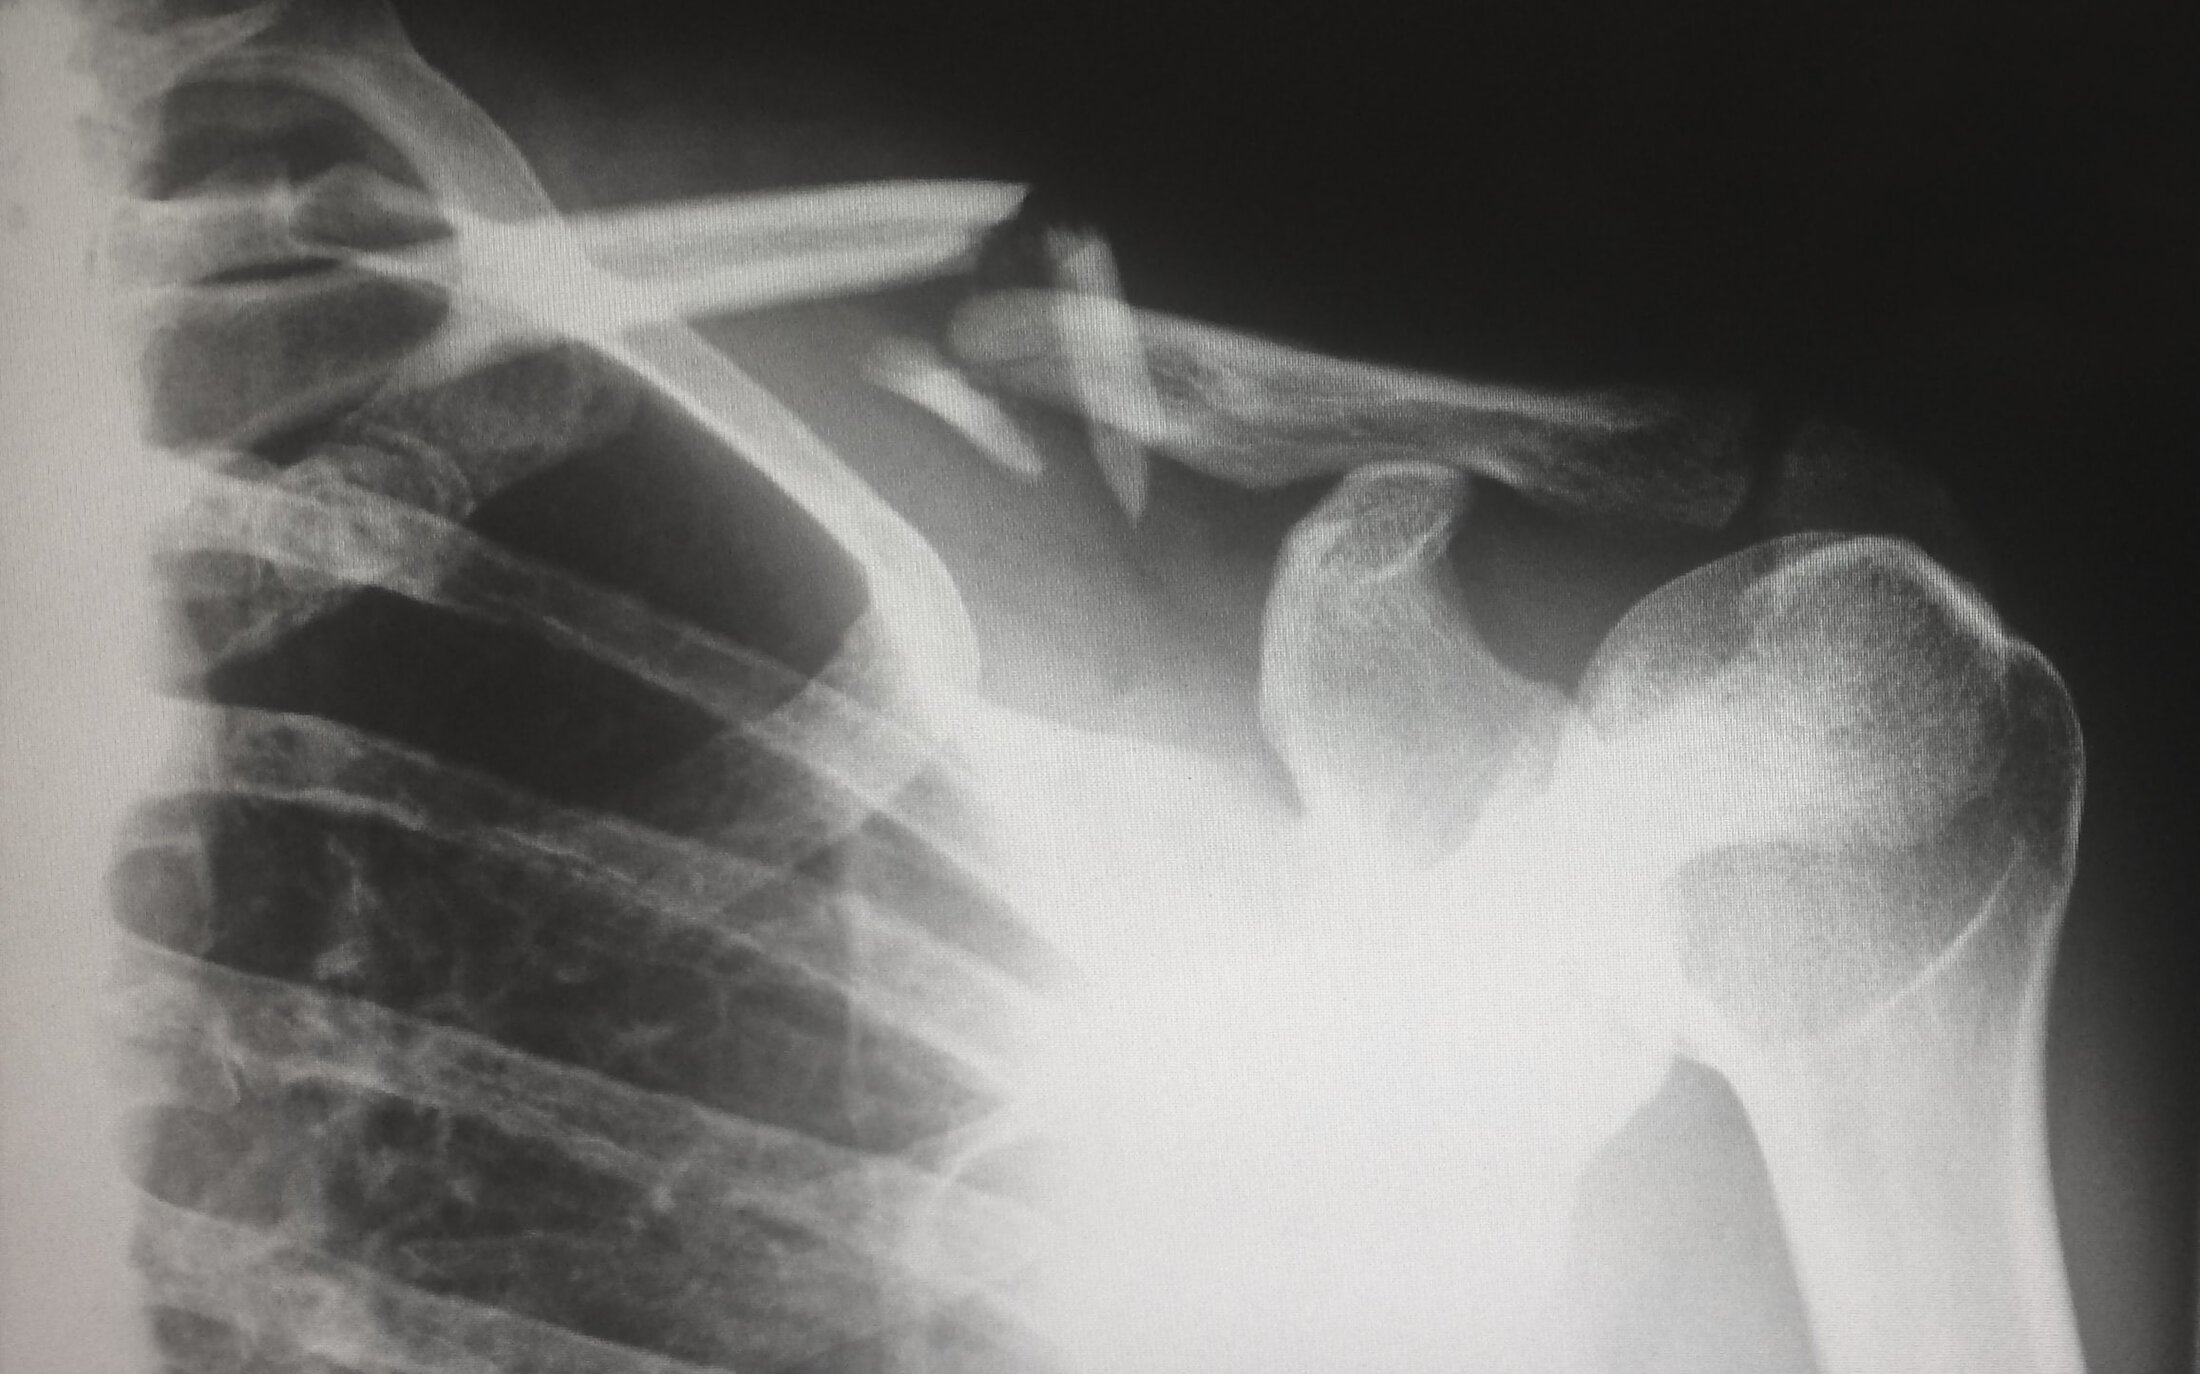 x ray showing a broken clavicle